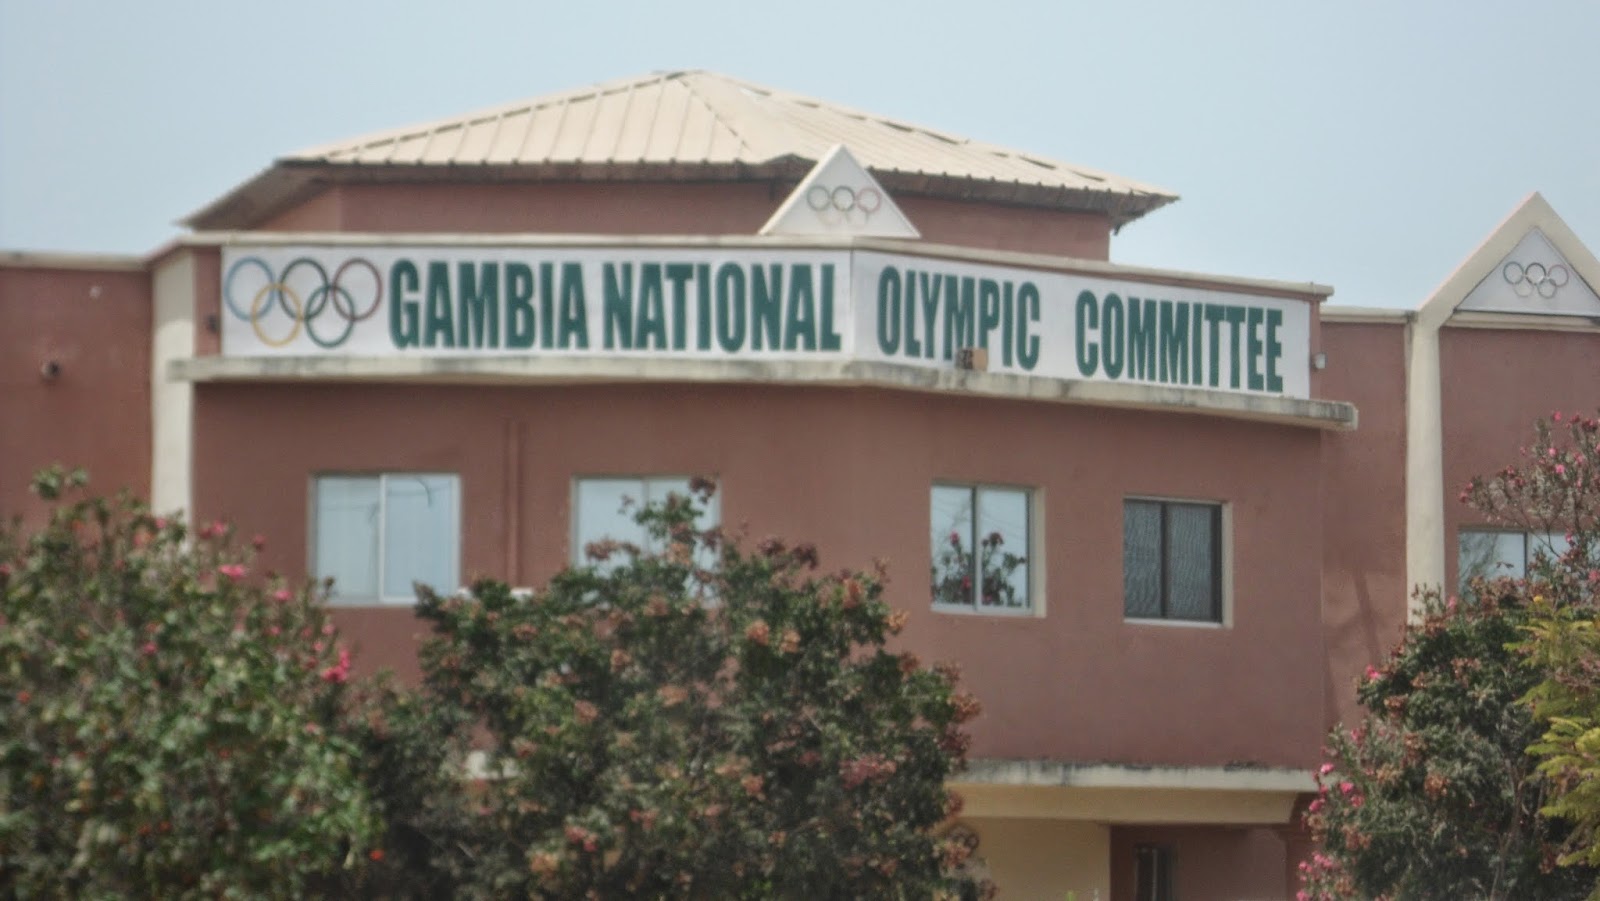 The announcement comes after a year dominated by a dispute between the Gambian Government and GNOC, which included the closure of the GNOC headquarters ©GNOC